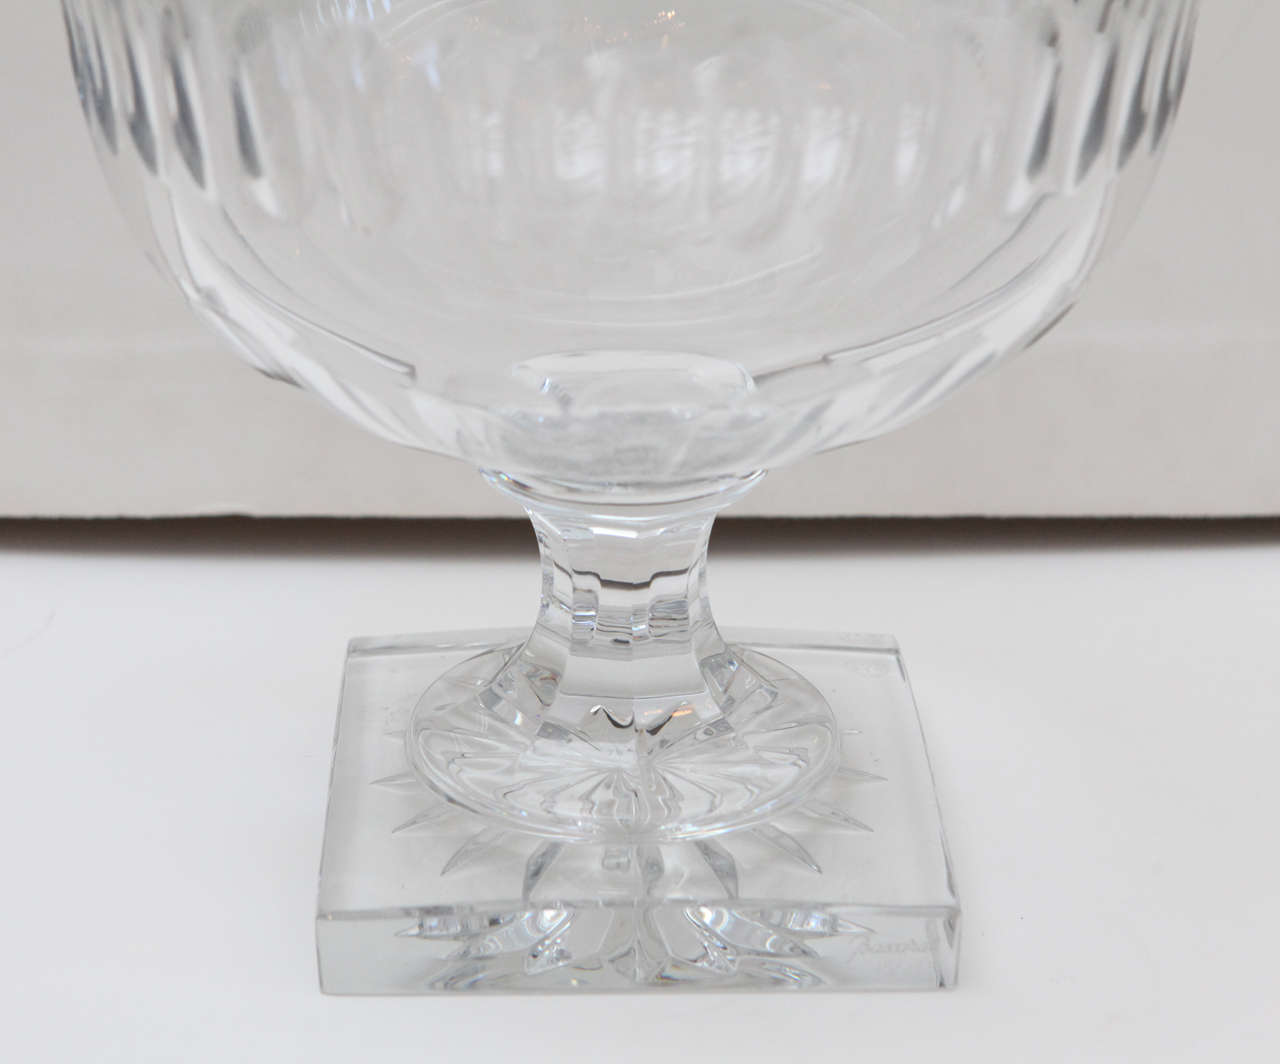 French Limited Edition, Baccarat Candy Dish, circa 1910